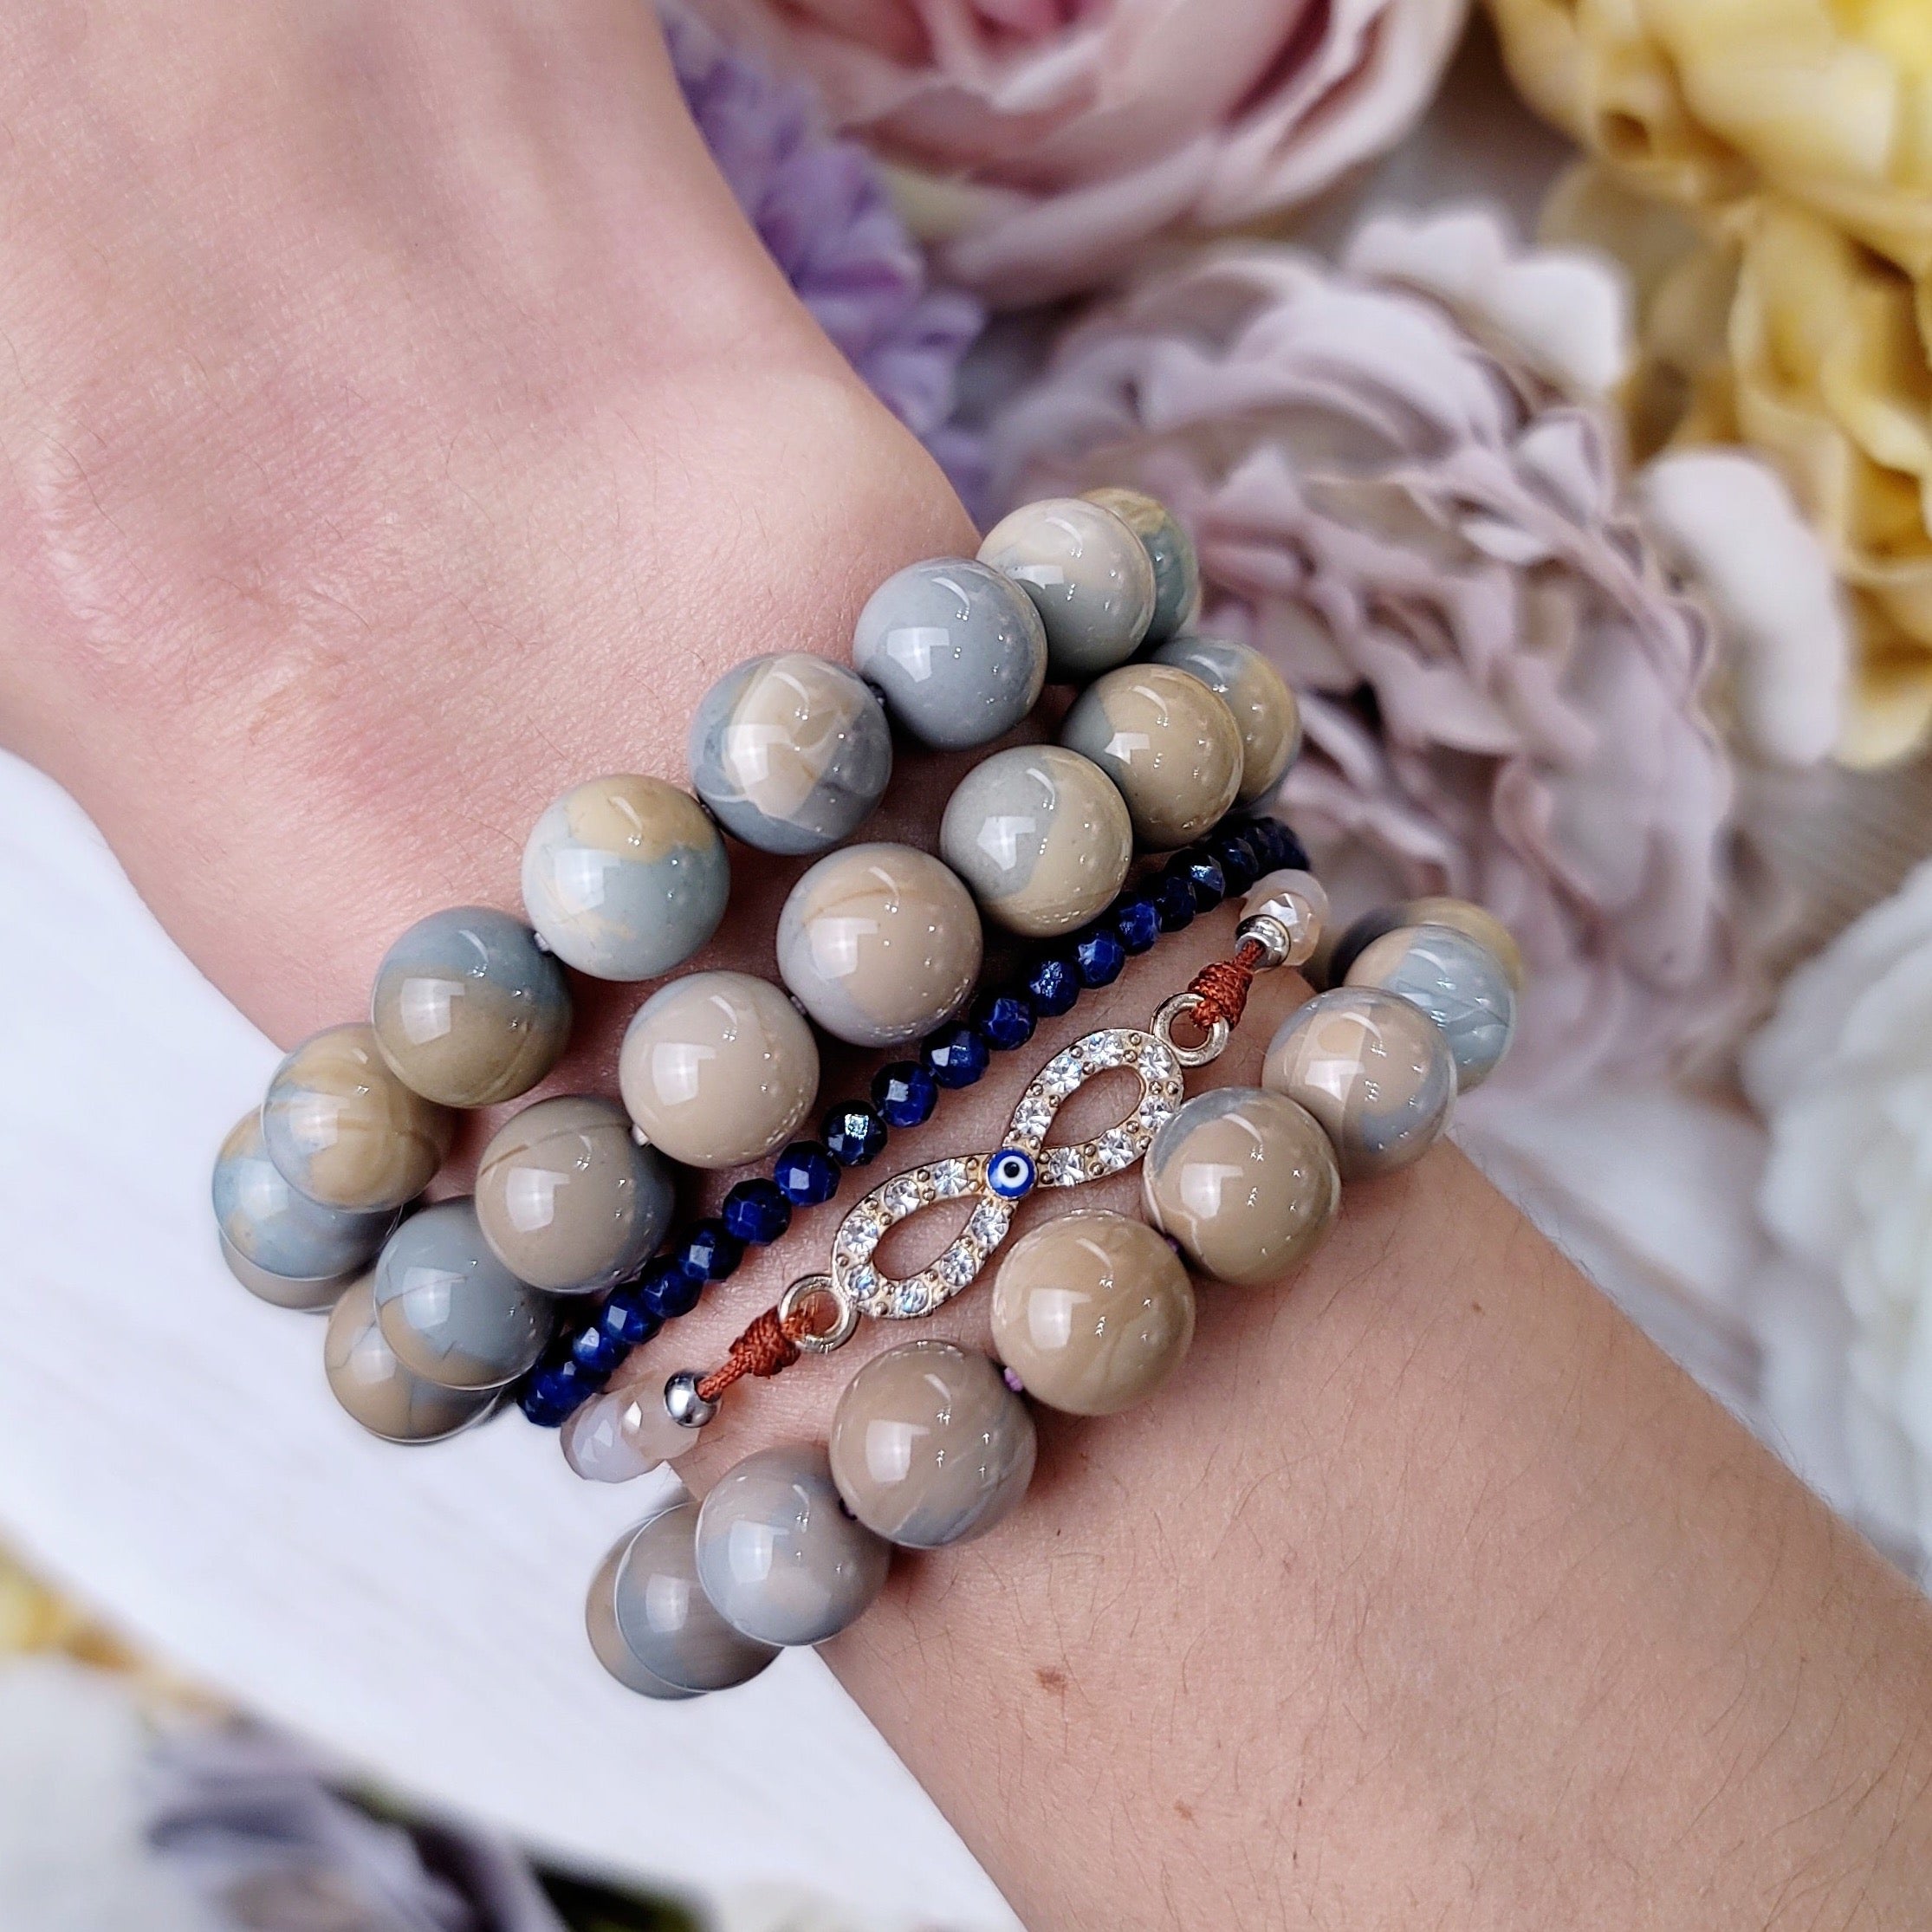 Blue Alashan Agate Bracelet (High Quality) for Chasing your Dreams, Enhanced Memory, Protection & Stress Relief